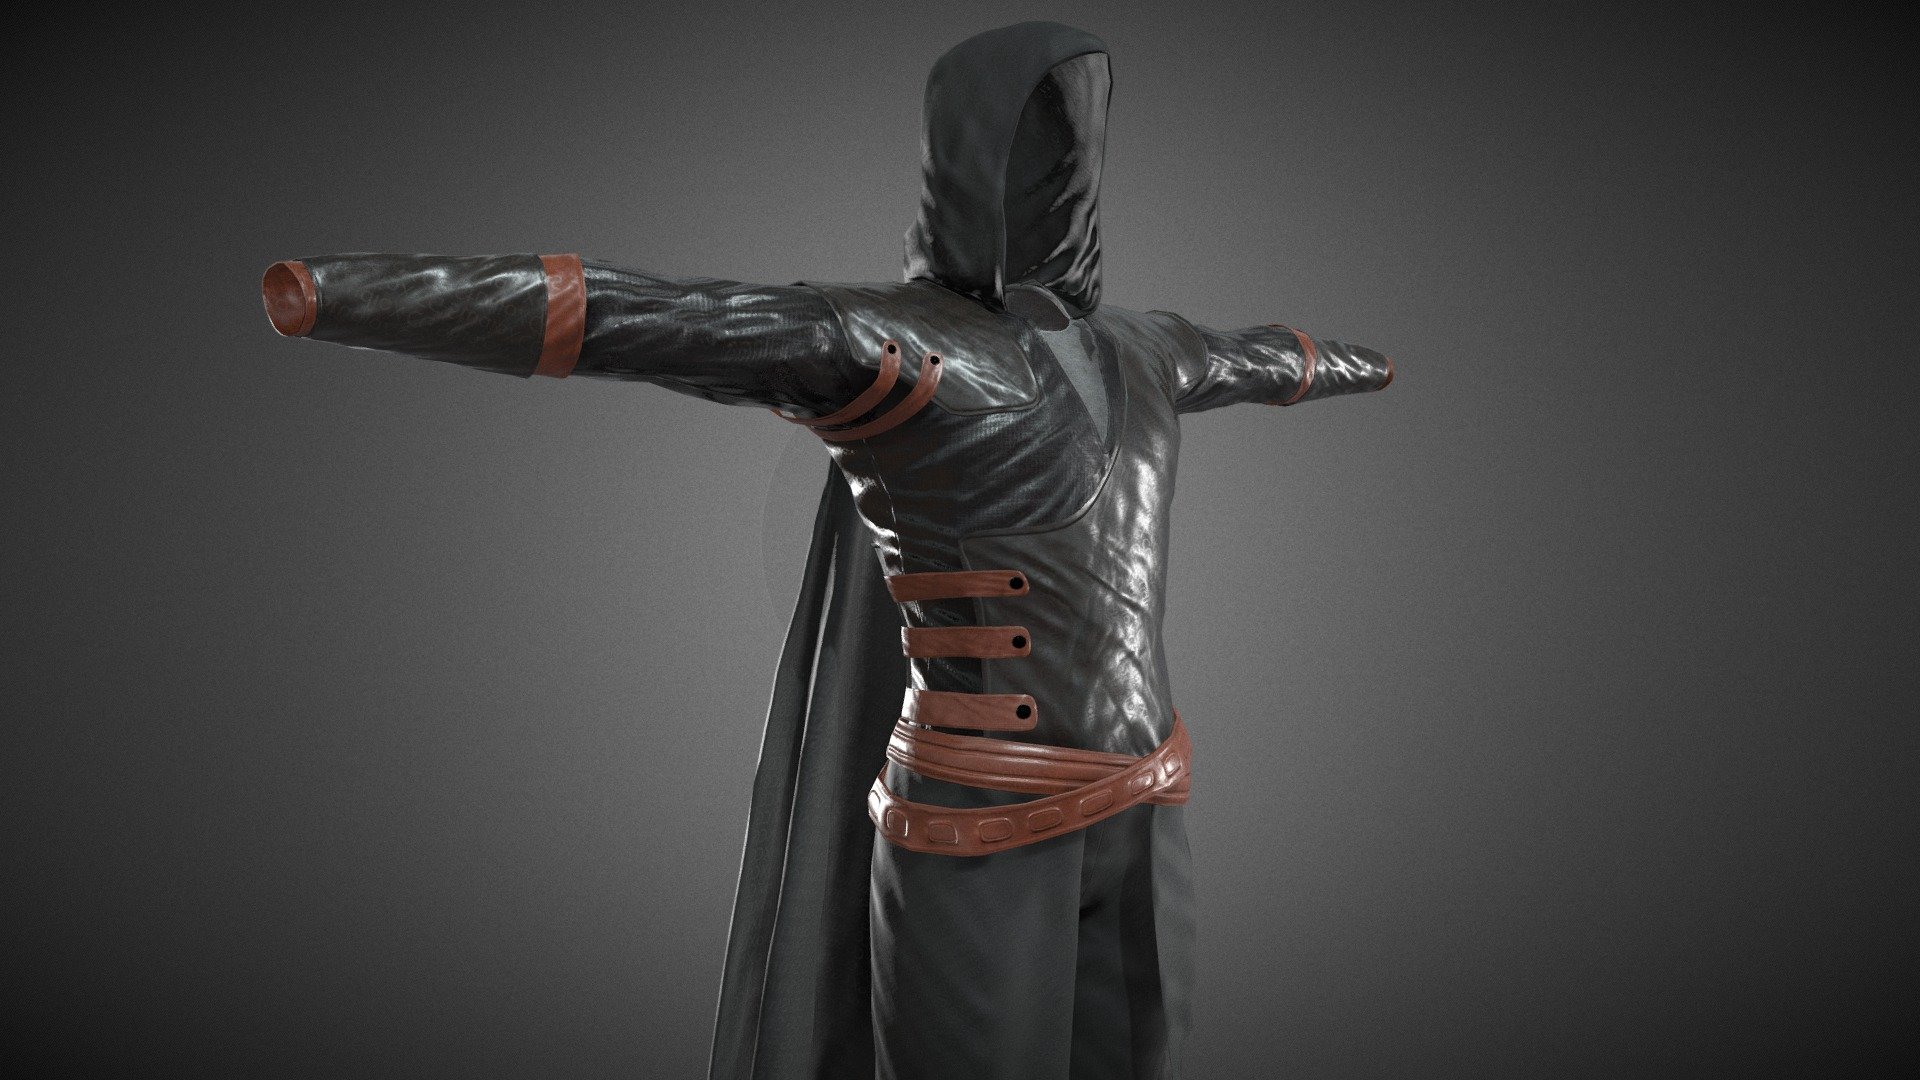 CG StudioX Present :
Male Assassin Outfit 2 lowpoly/PBR




This is Male Assassin Outfit 2 Comes with Specular and Metalness PBR.

The photo been rendered using Marmoset Toolbag 3 (real time game engine )


Features :



Comes with Specular and Metalness PBR 4K texture .

Good topology.

Low polygon geometry.

The Model is prefect for game for both Specular workflow as in Unity and Metalness as in Unreal engine .

The model also rendered using Marmoset Toolbag 3 with both Specular and Metalness PBR and also included in the product with the full texture.

The product has ID map in every part for changing any part in the model .

The texture can be easily adjustable .


Texture :



ALL Texture [Albedo -Normal-Metalness -Roughness-Gloss-Specular-ID-AO] (4096*4096)

Three objects (Top-Pants-Boots) each one has it own UV set and textures.


Files :
Marmoset Toolbag 3 ,Maya,,FBX,OBj with all the textures.




Contact me for if you have any questions.
 - Male Assassin Outfit 2 - Buy Royalty Free 3D model by CG StudioX (@CG_StudioX) 3d model